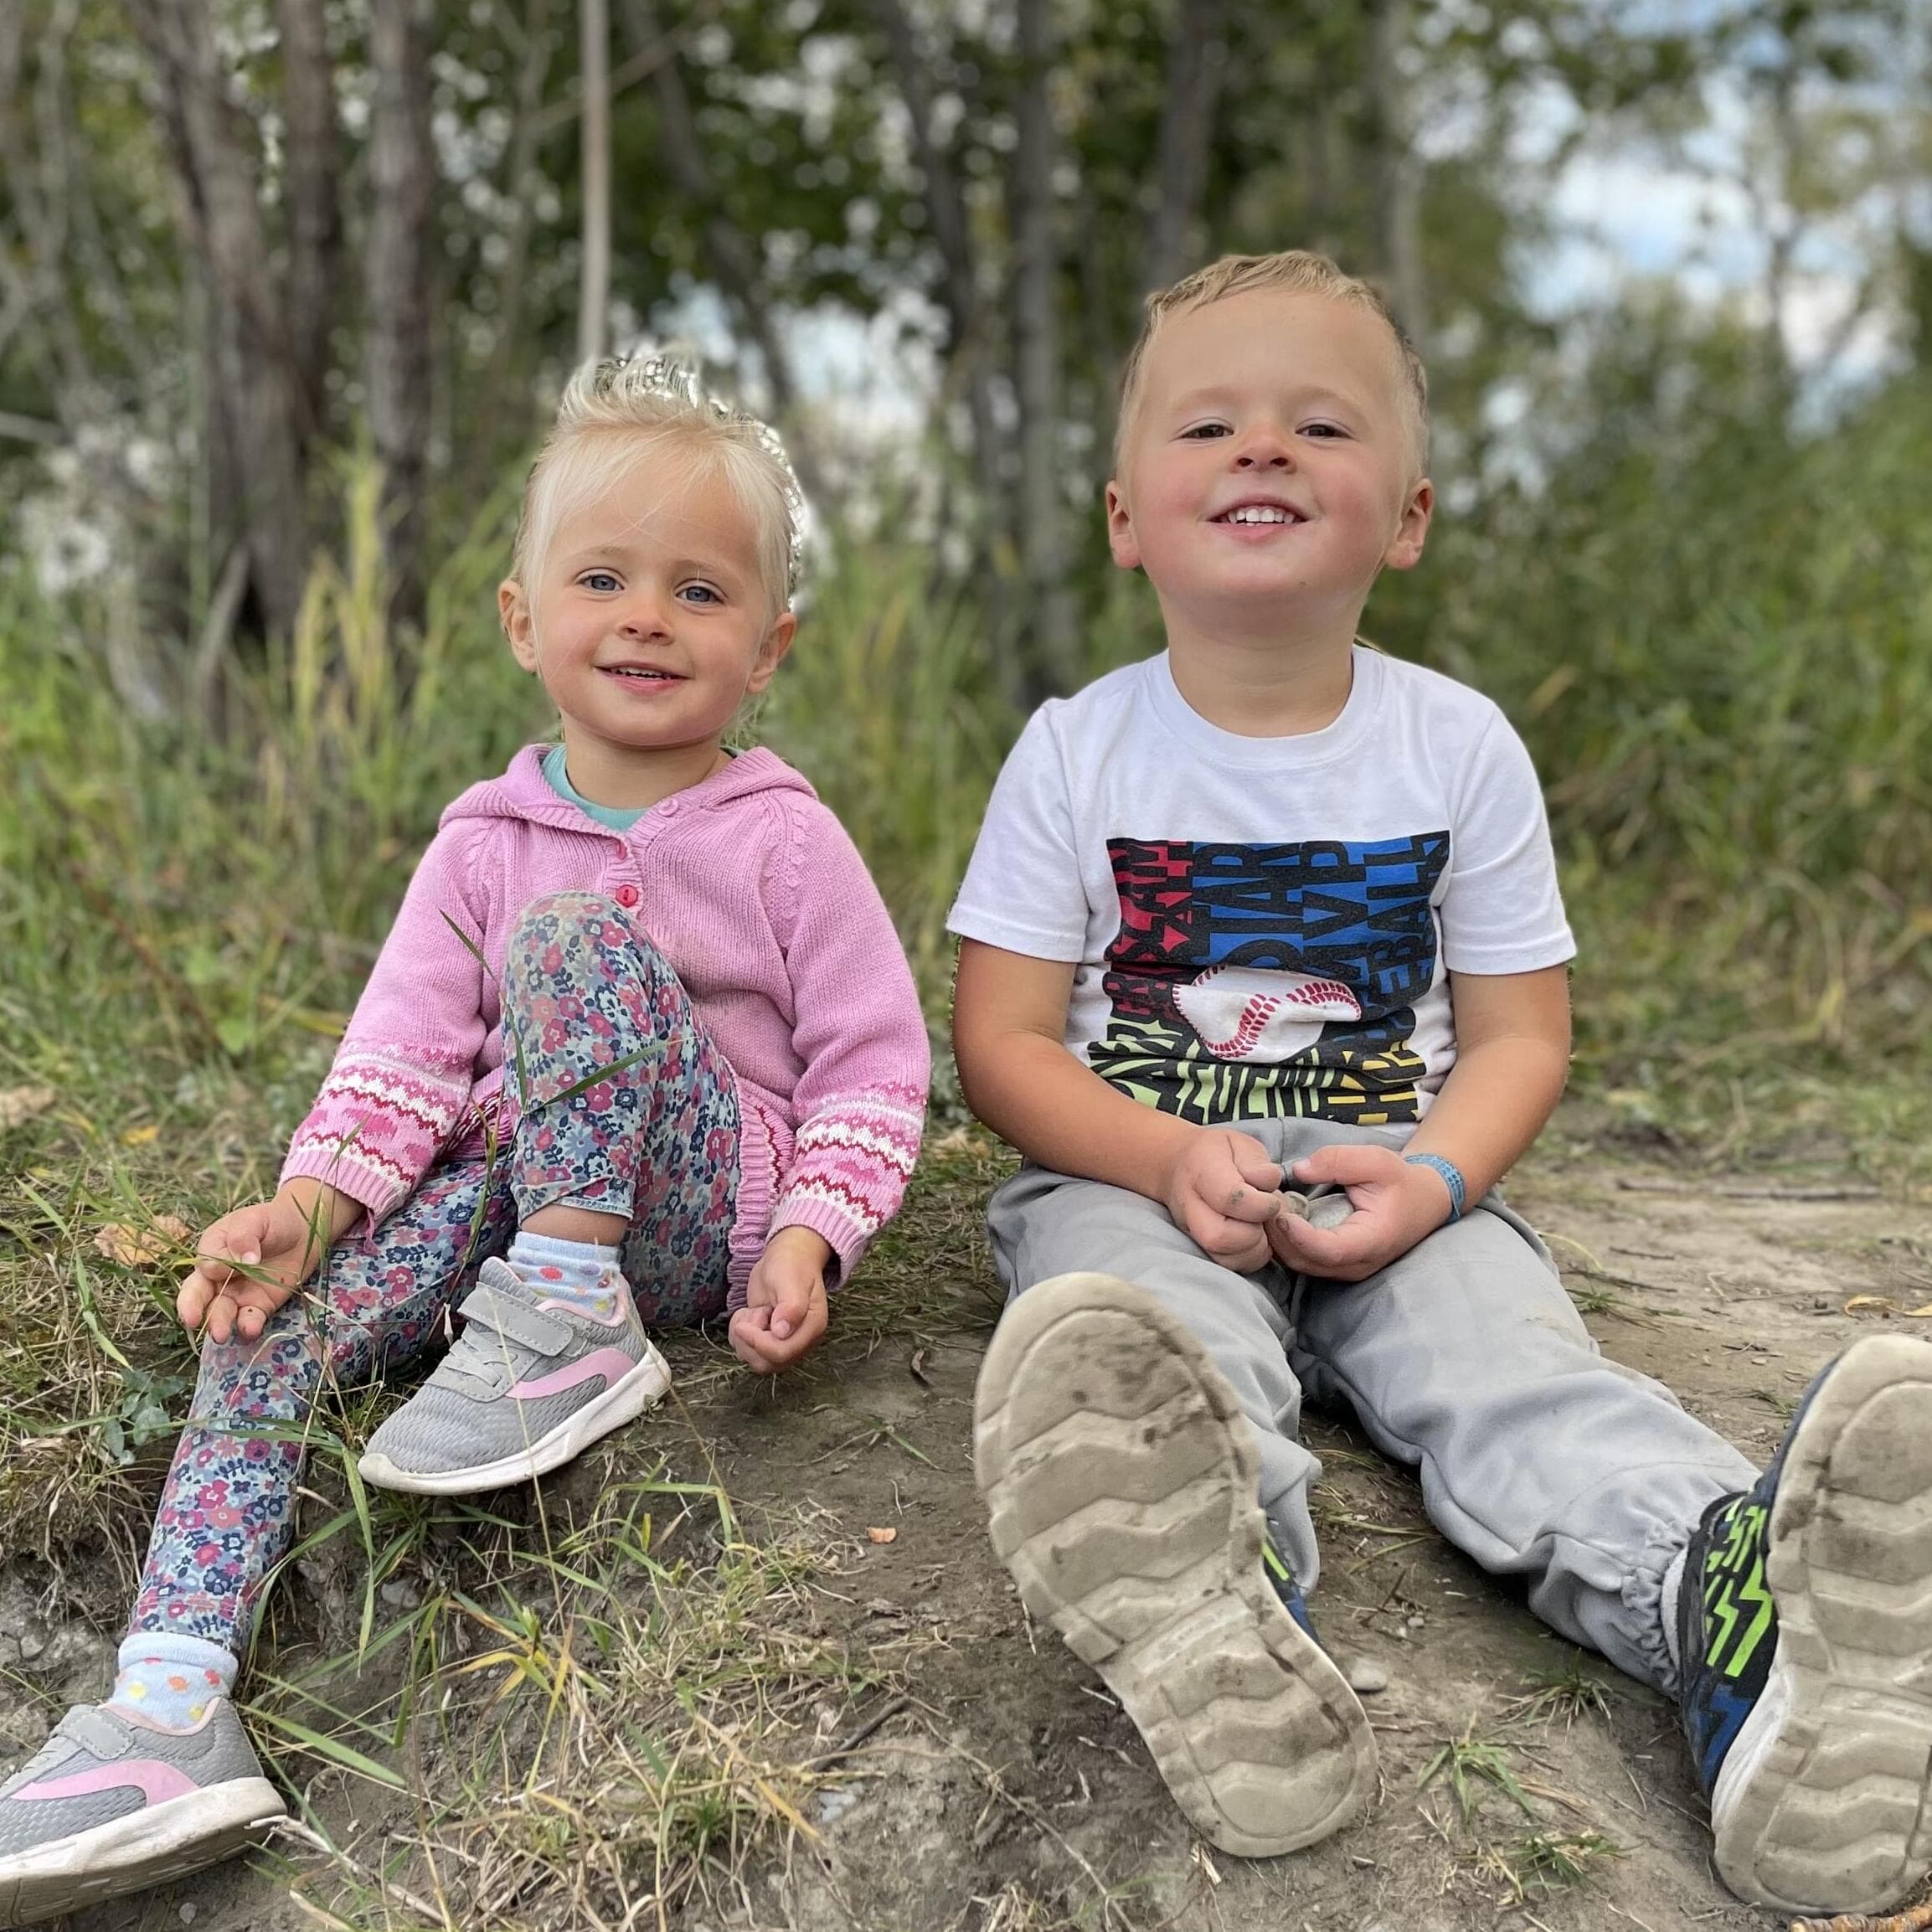 Looking for an experienced nanny for our two kids (2&4) in SE Calgary, Alberta.